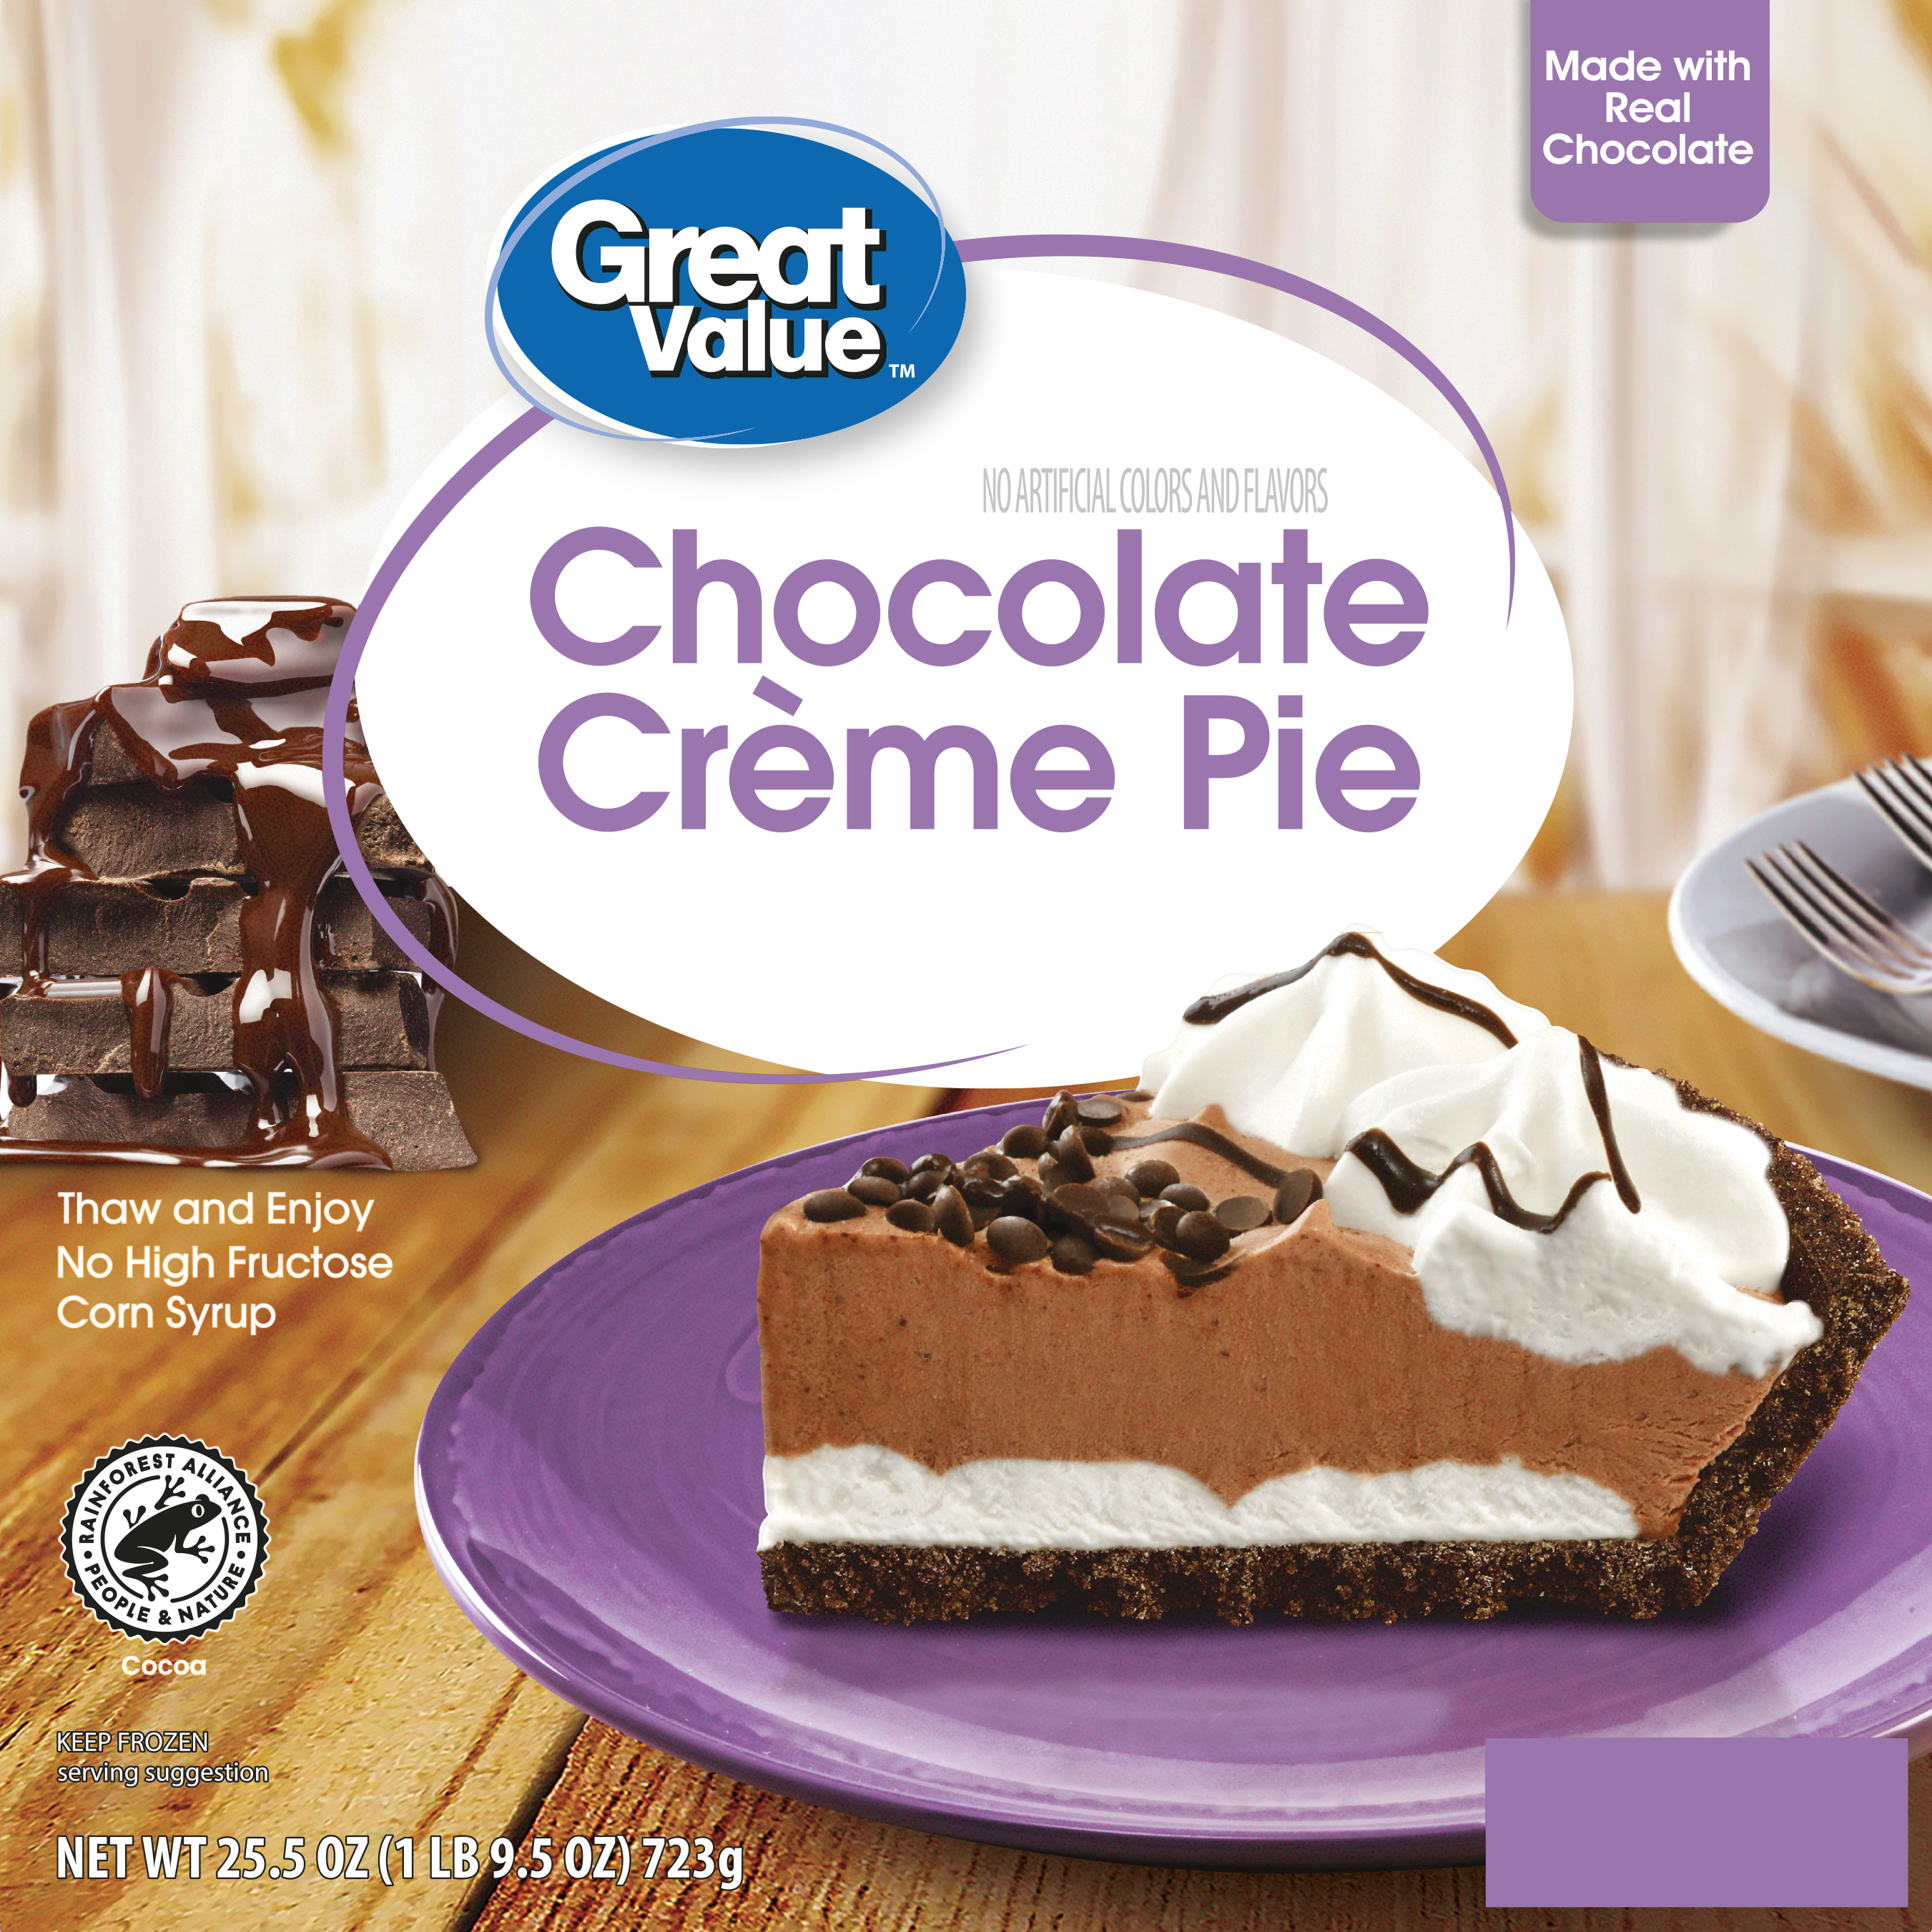 Great Value Chocolate Creme Pie, Frozen Dessert, 25.5 oz, Made with Real Chocolate, No HFCS, Box (Frozen) - image 1 of 5